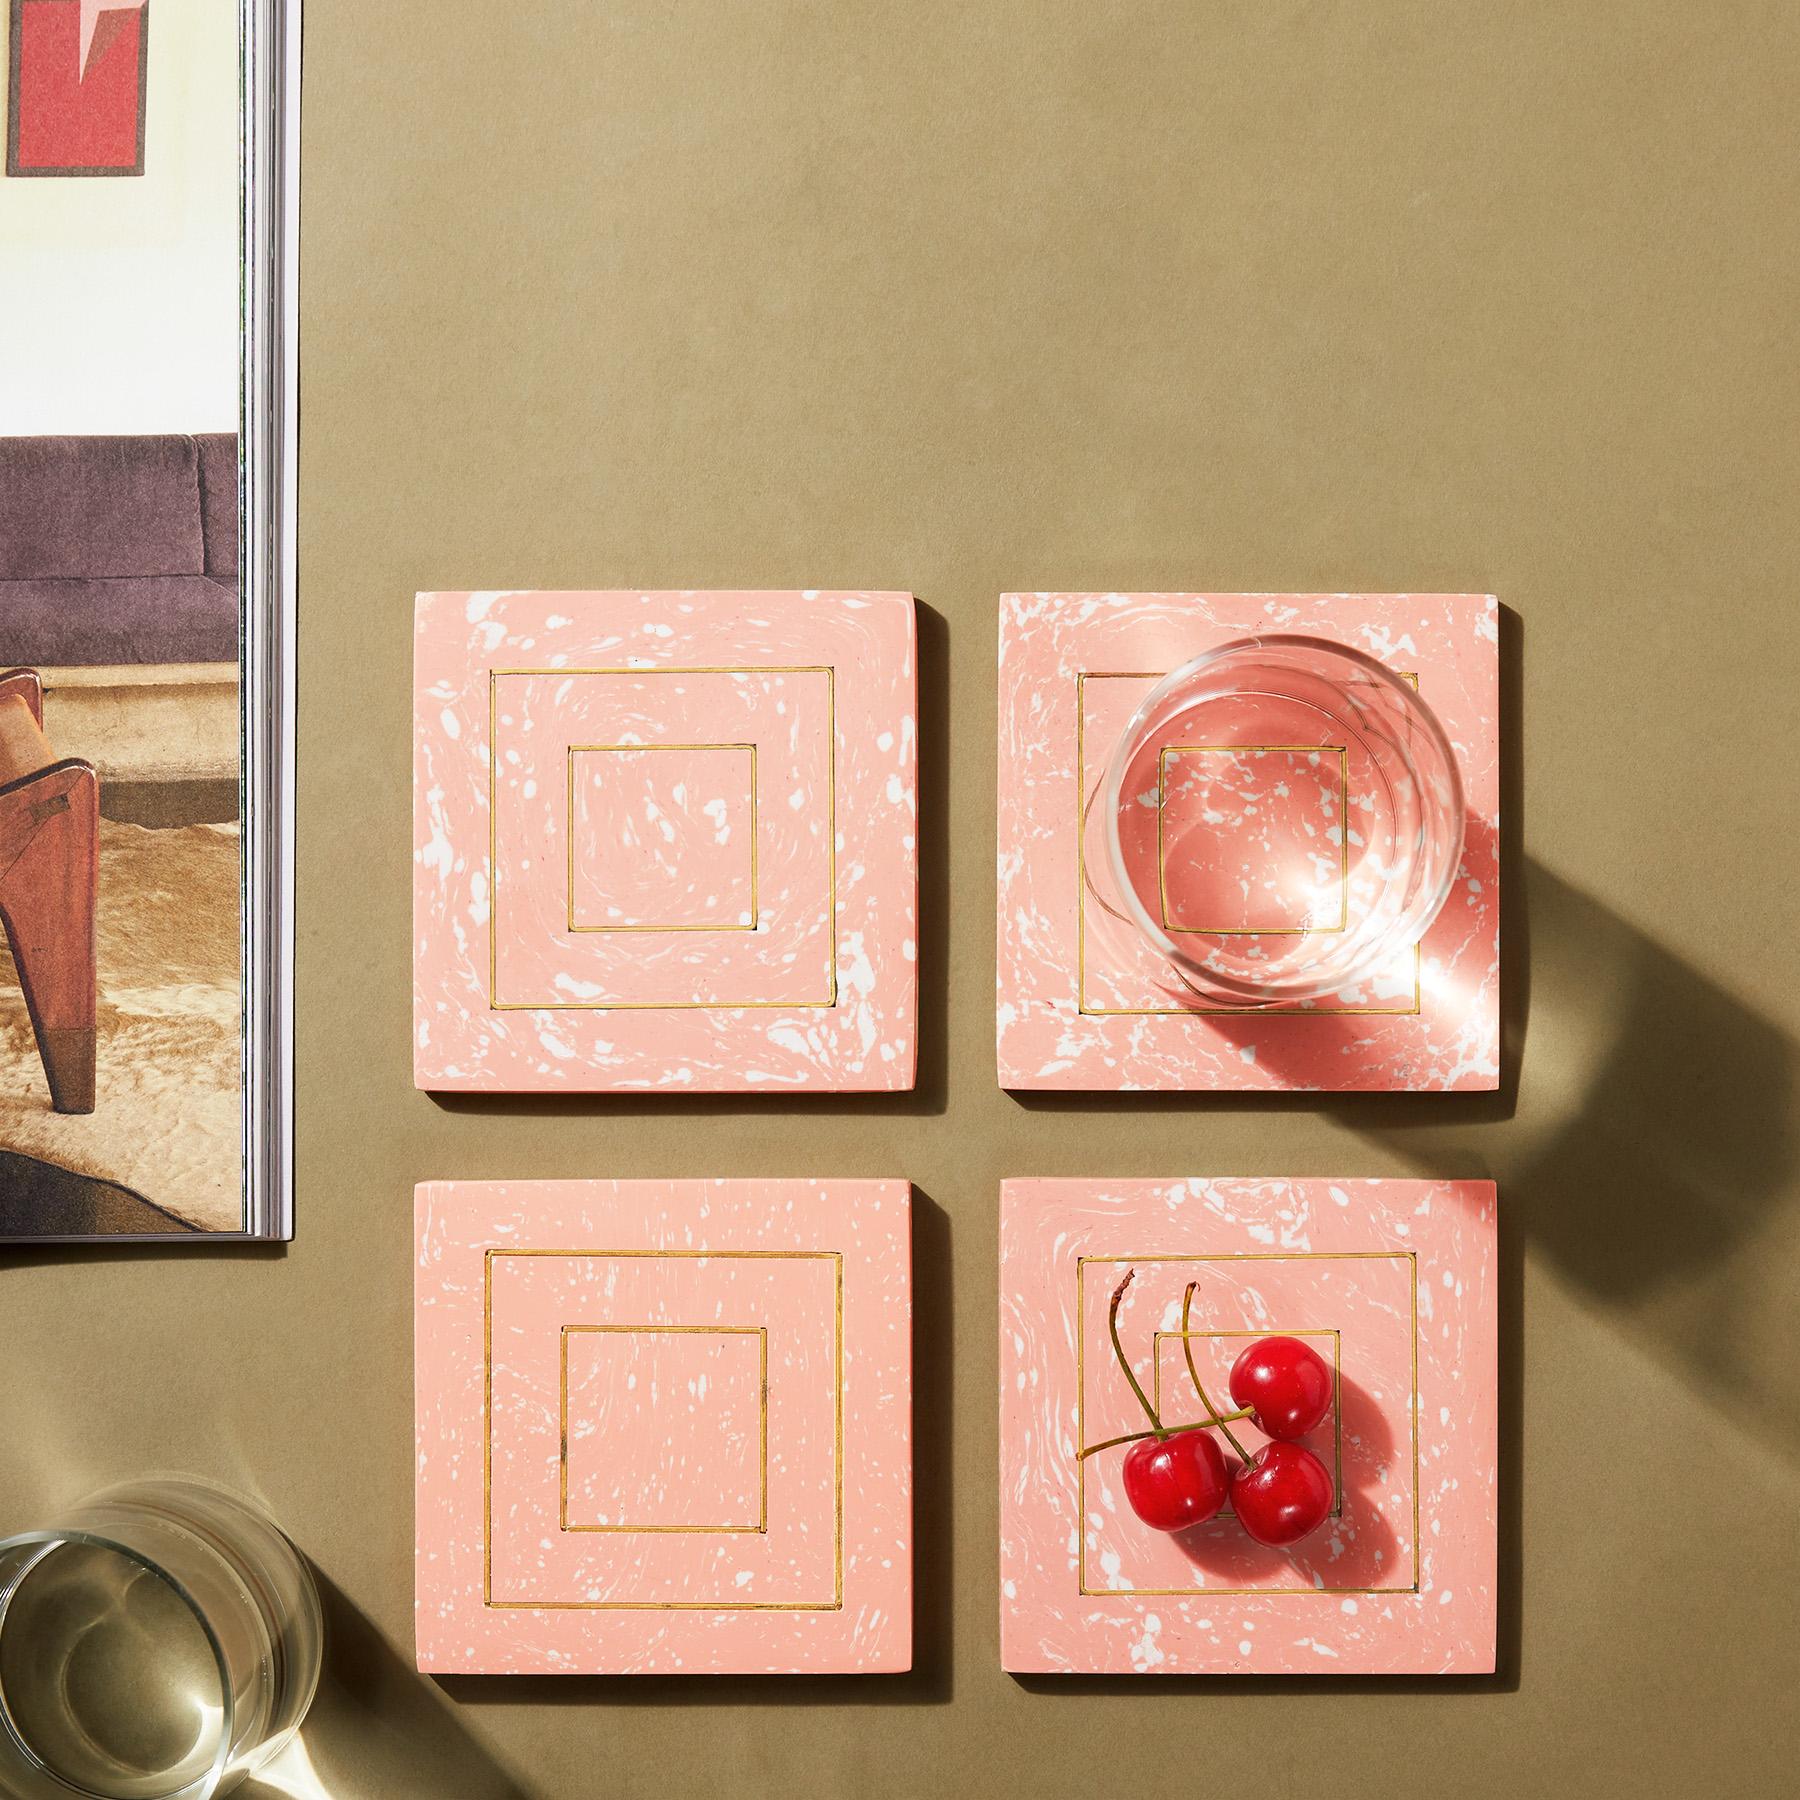 Peach Marble & Brass Square Coasters